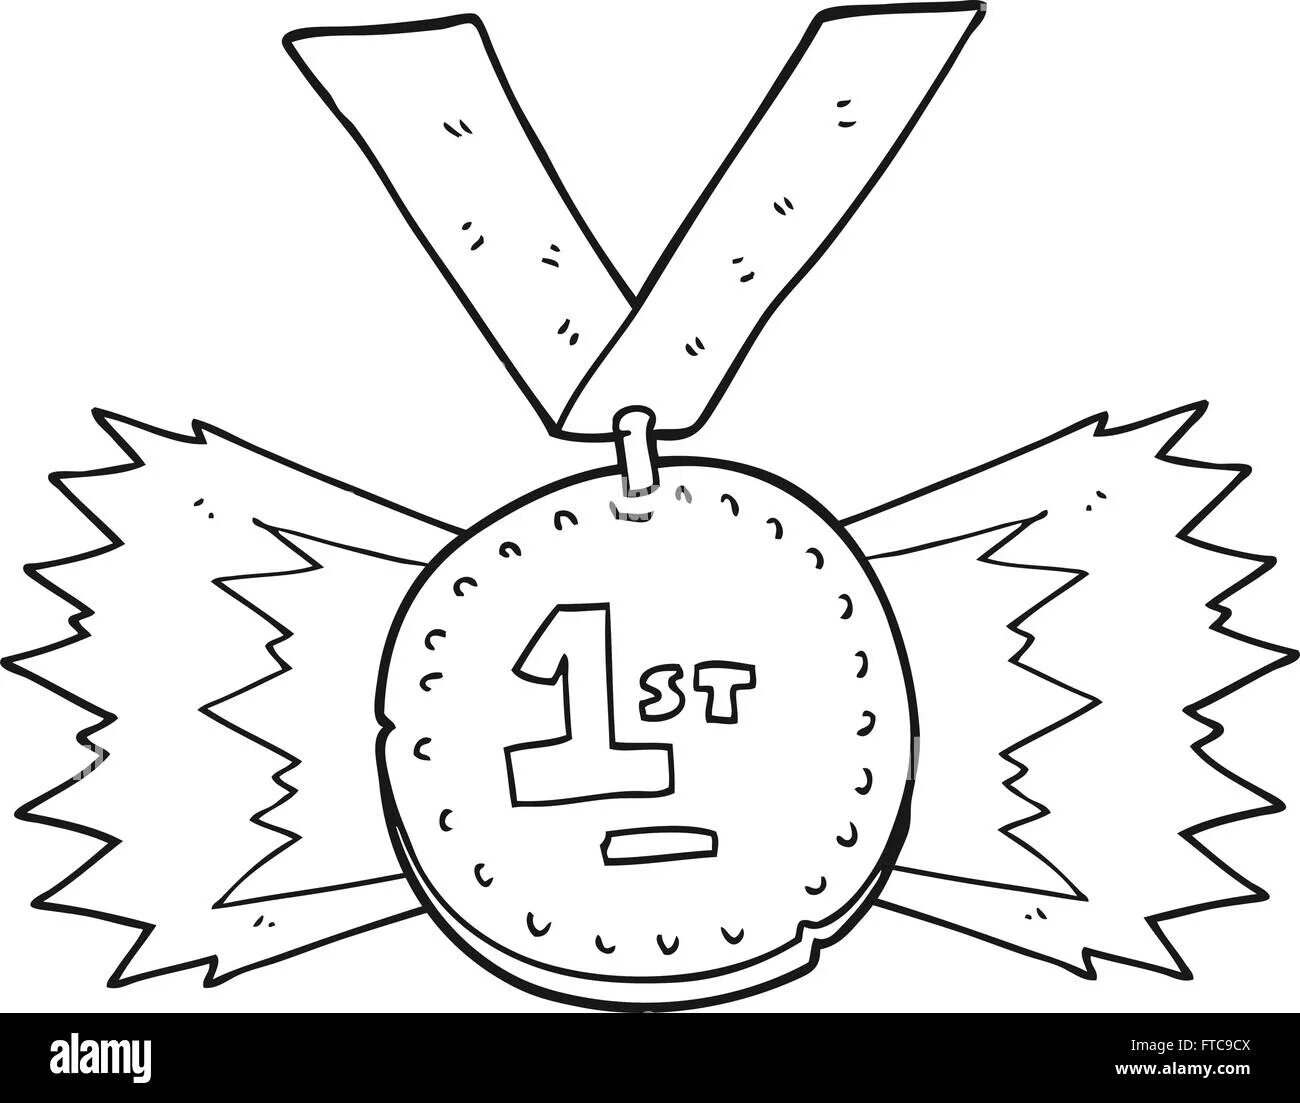 Artistic medal coloring page